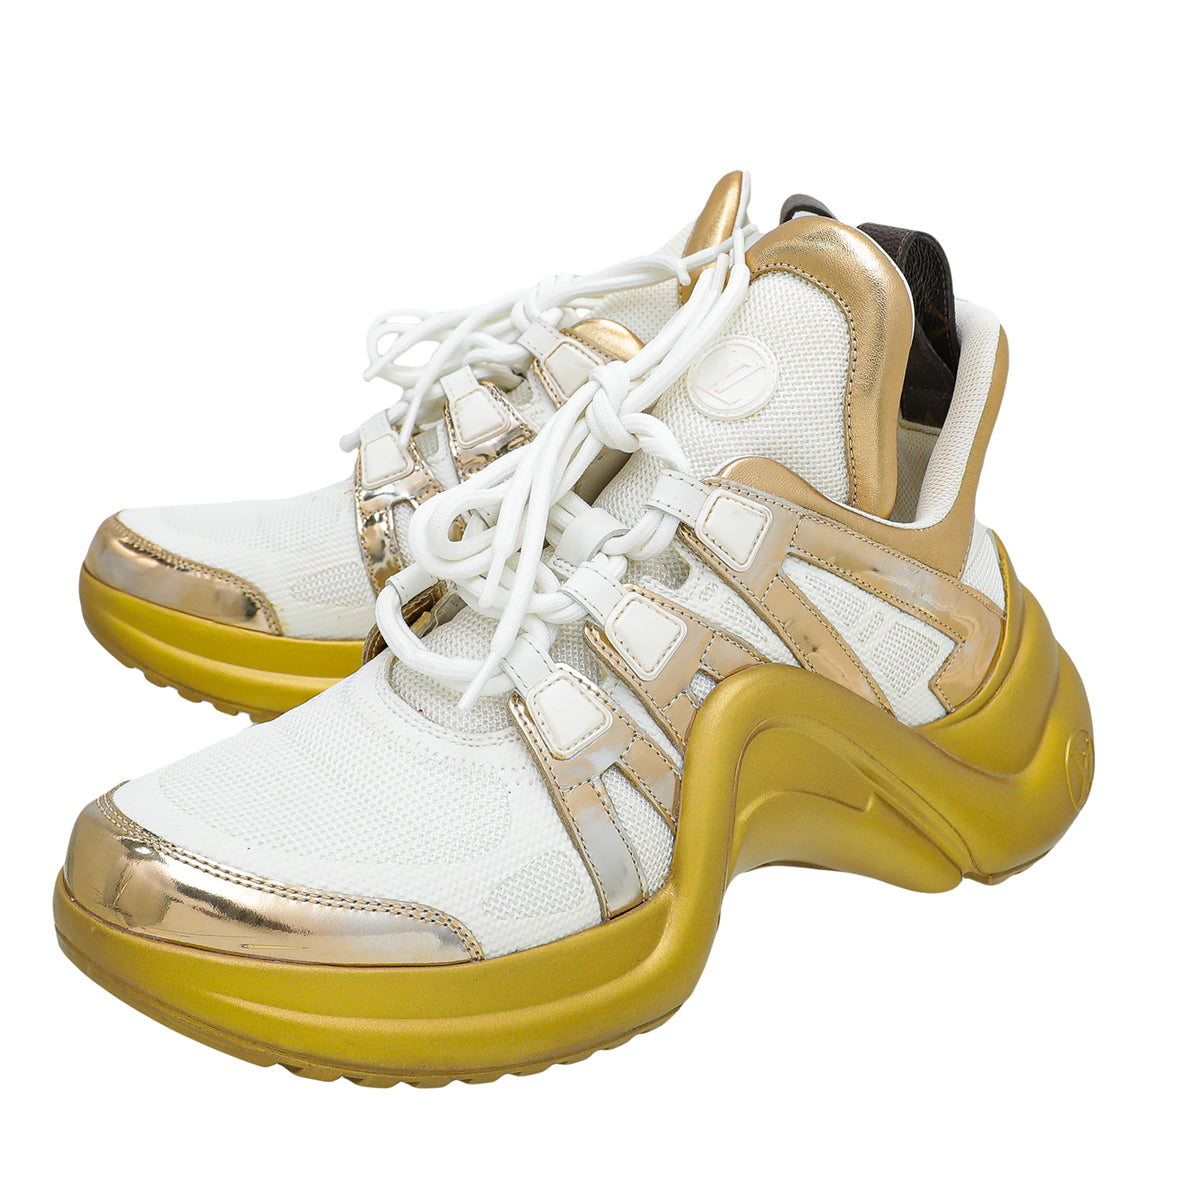 Louis Vutton LVXLOL LV Archlight Sneaker Gold Silver  Winter sneakers  outfit, Lv sneakers, Sneakers paris